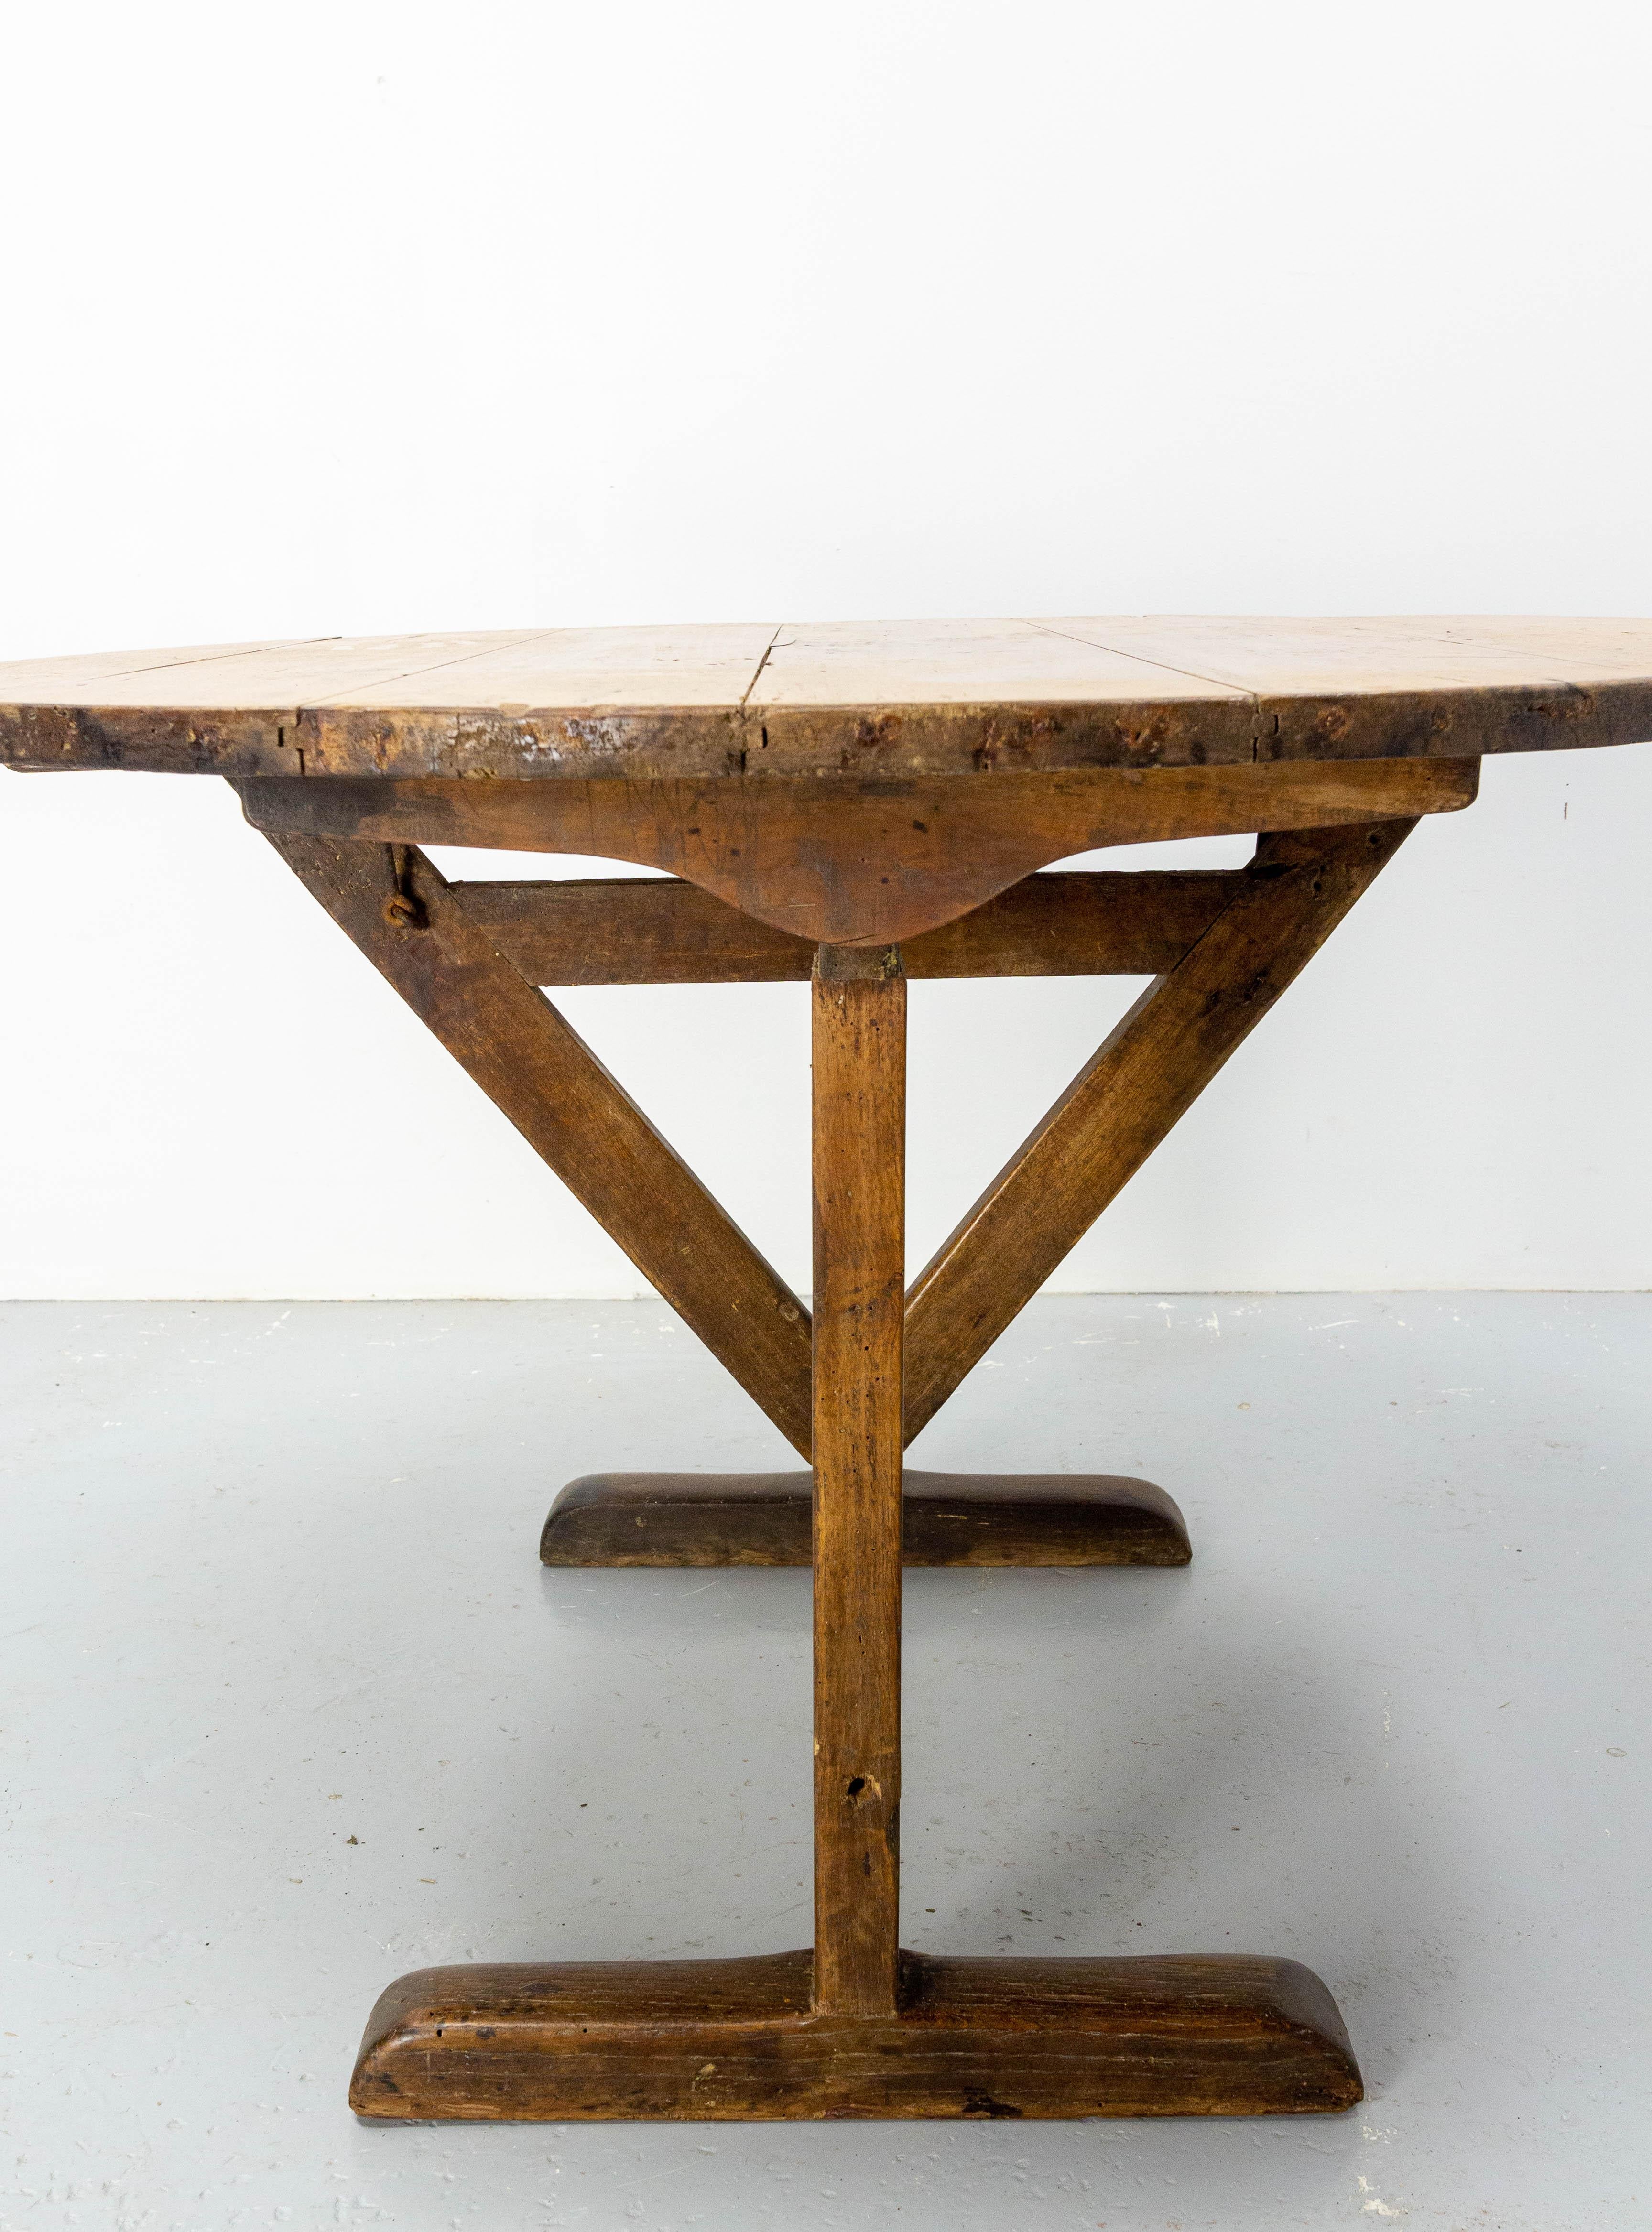 French Foldable Oak & Poplar Table Called Winemaker's Table, 19th Century For Sale 3